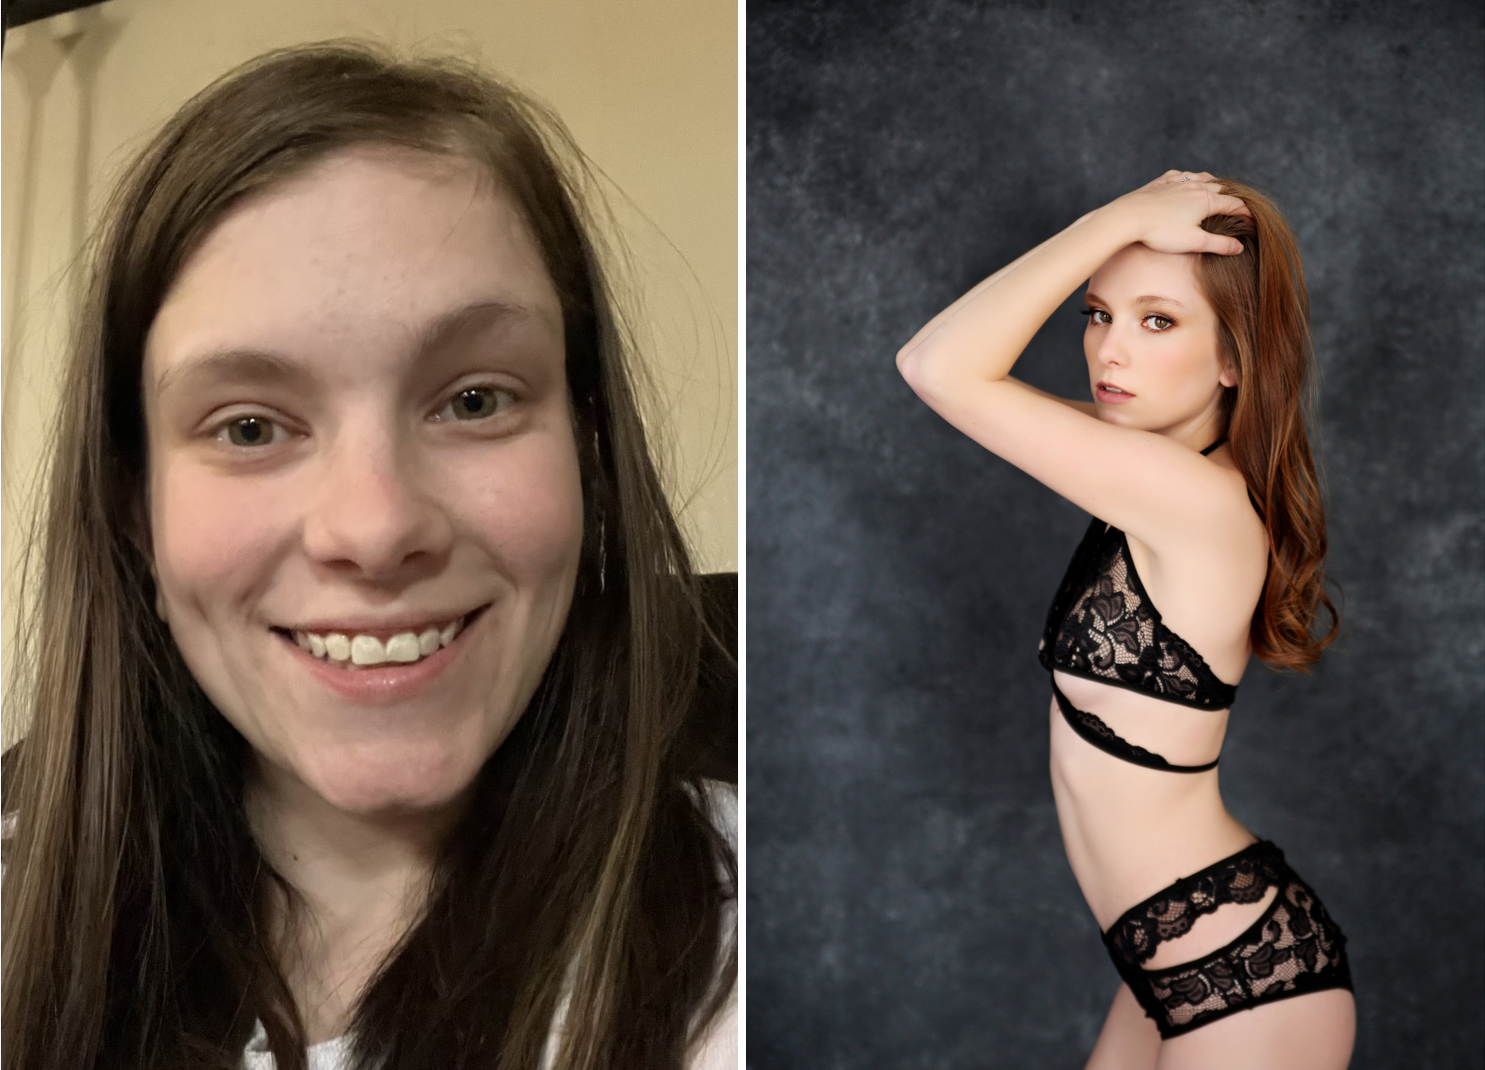 Before: a smiling young woman with long brown hair and a fair complexion, posing for a selfie indoors. After: a woman with red hair in black lingerie striking a pose against a dark textured wall